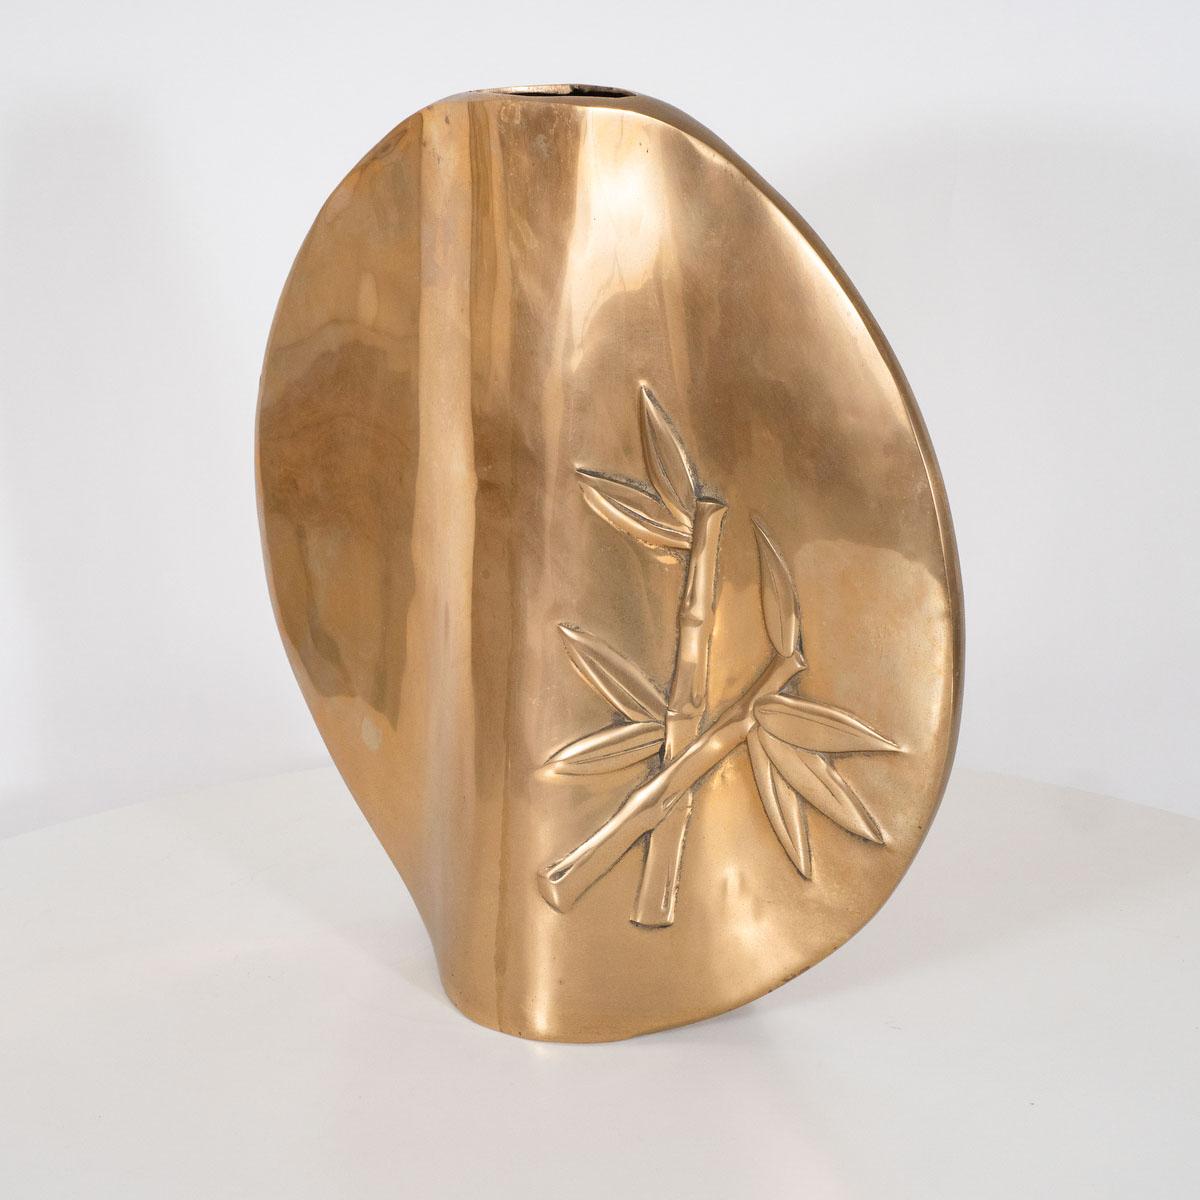 Large sculptural Japanese Brass Vase In Good Condition For Sale In Tarrytown, NY